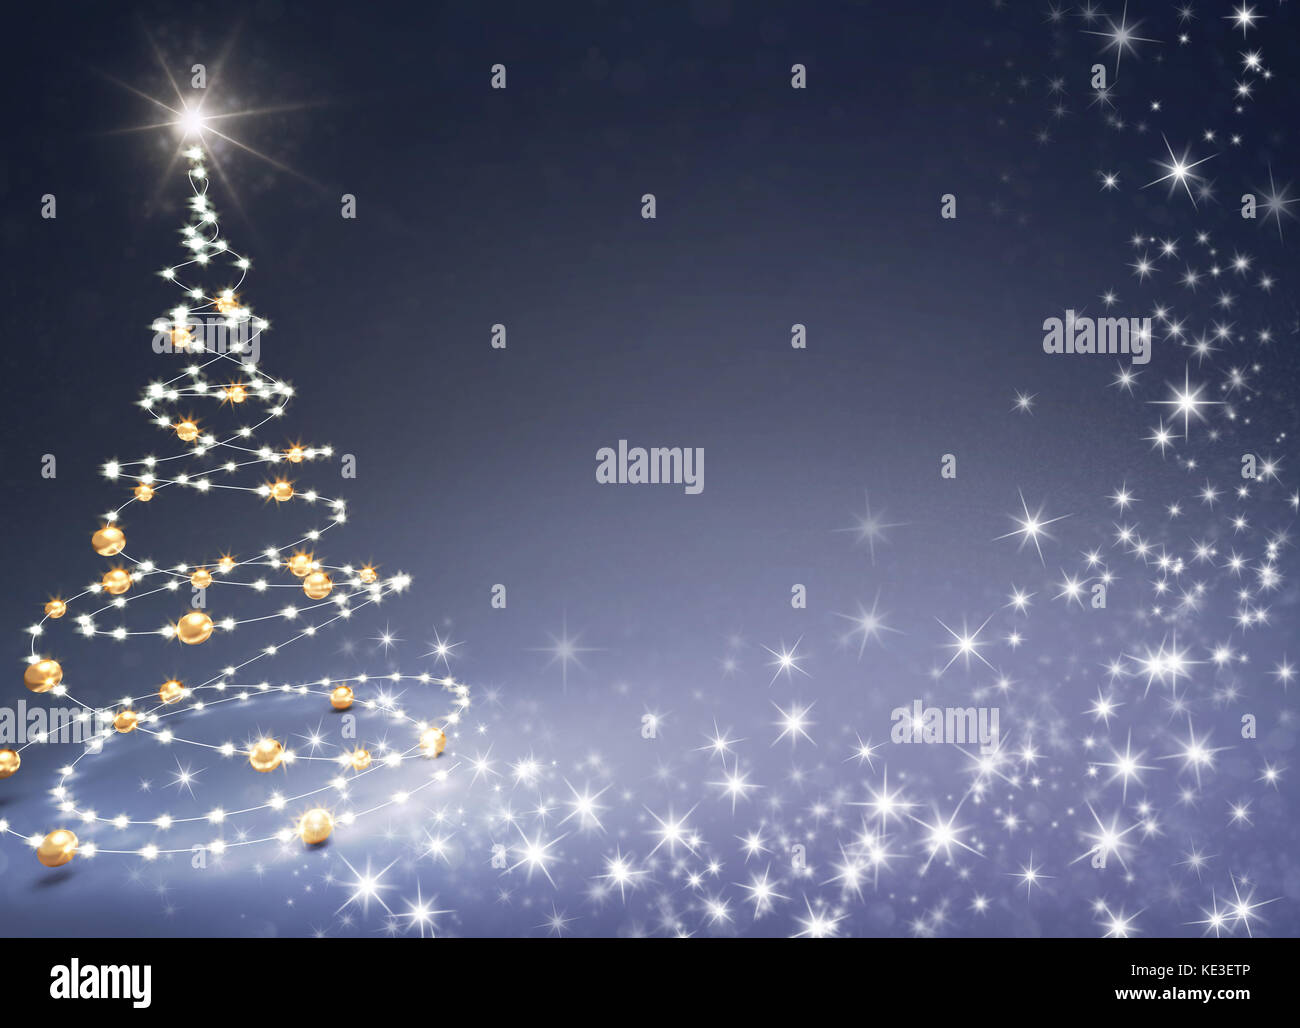 Christmas tree illustrated with light strings and gold Christmas balls on a glittering black background - 3D illustration Stock Photo